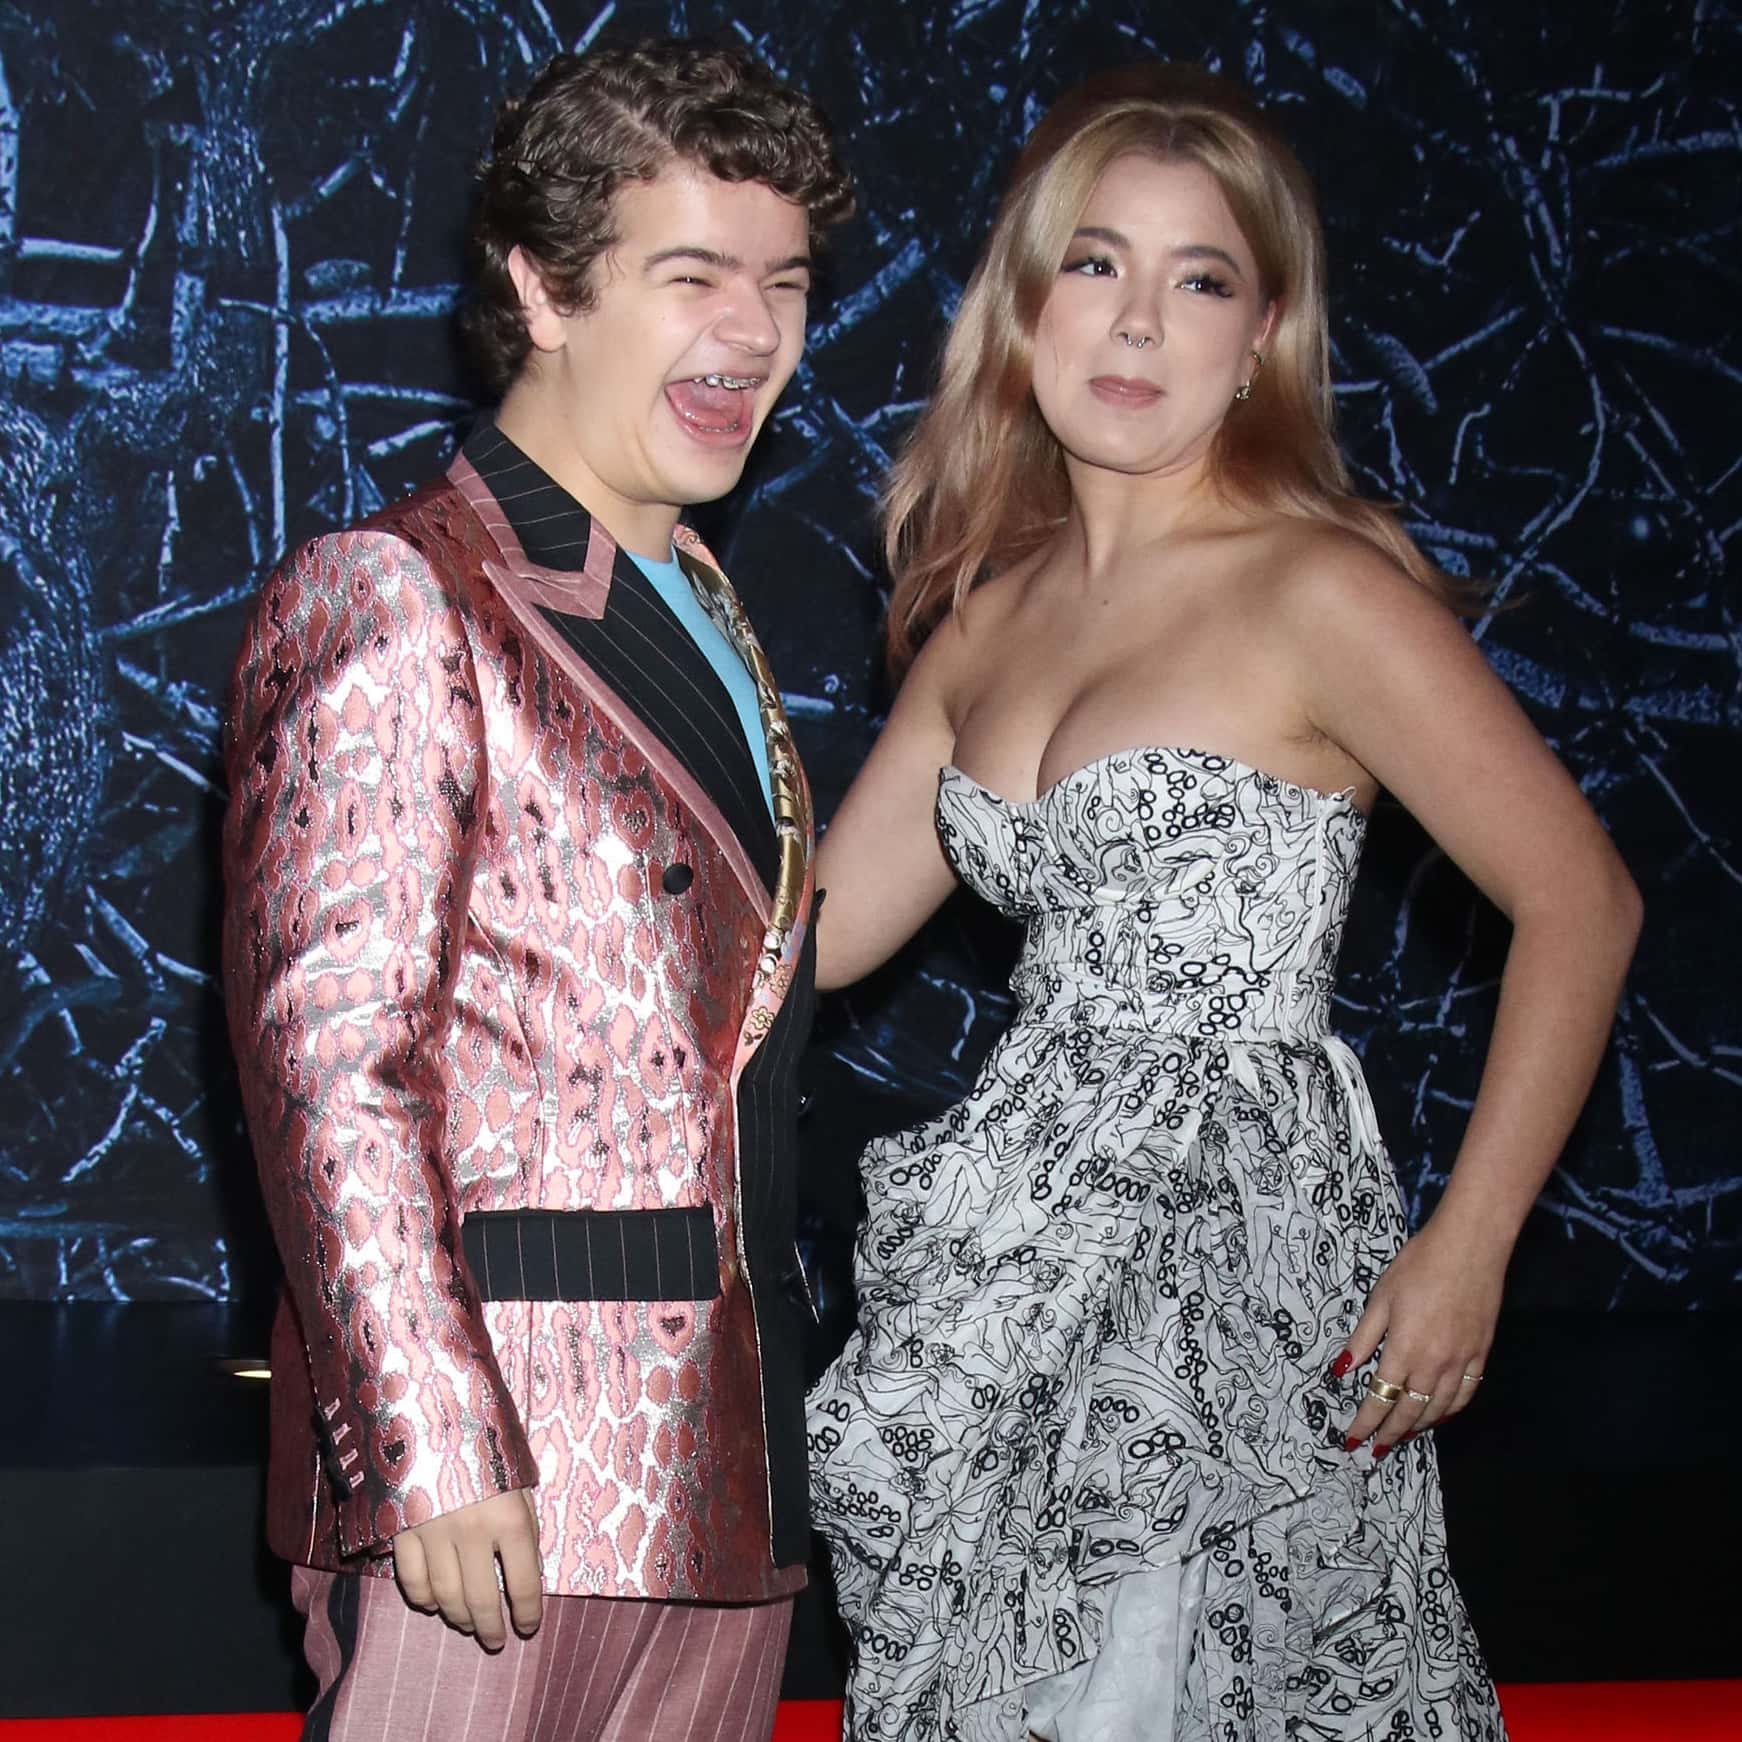 Gaten Matarazzo and Elizabeth "Lizzy" Yu started dating in 2018 and are living together in New Jersey